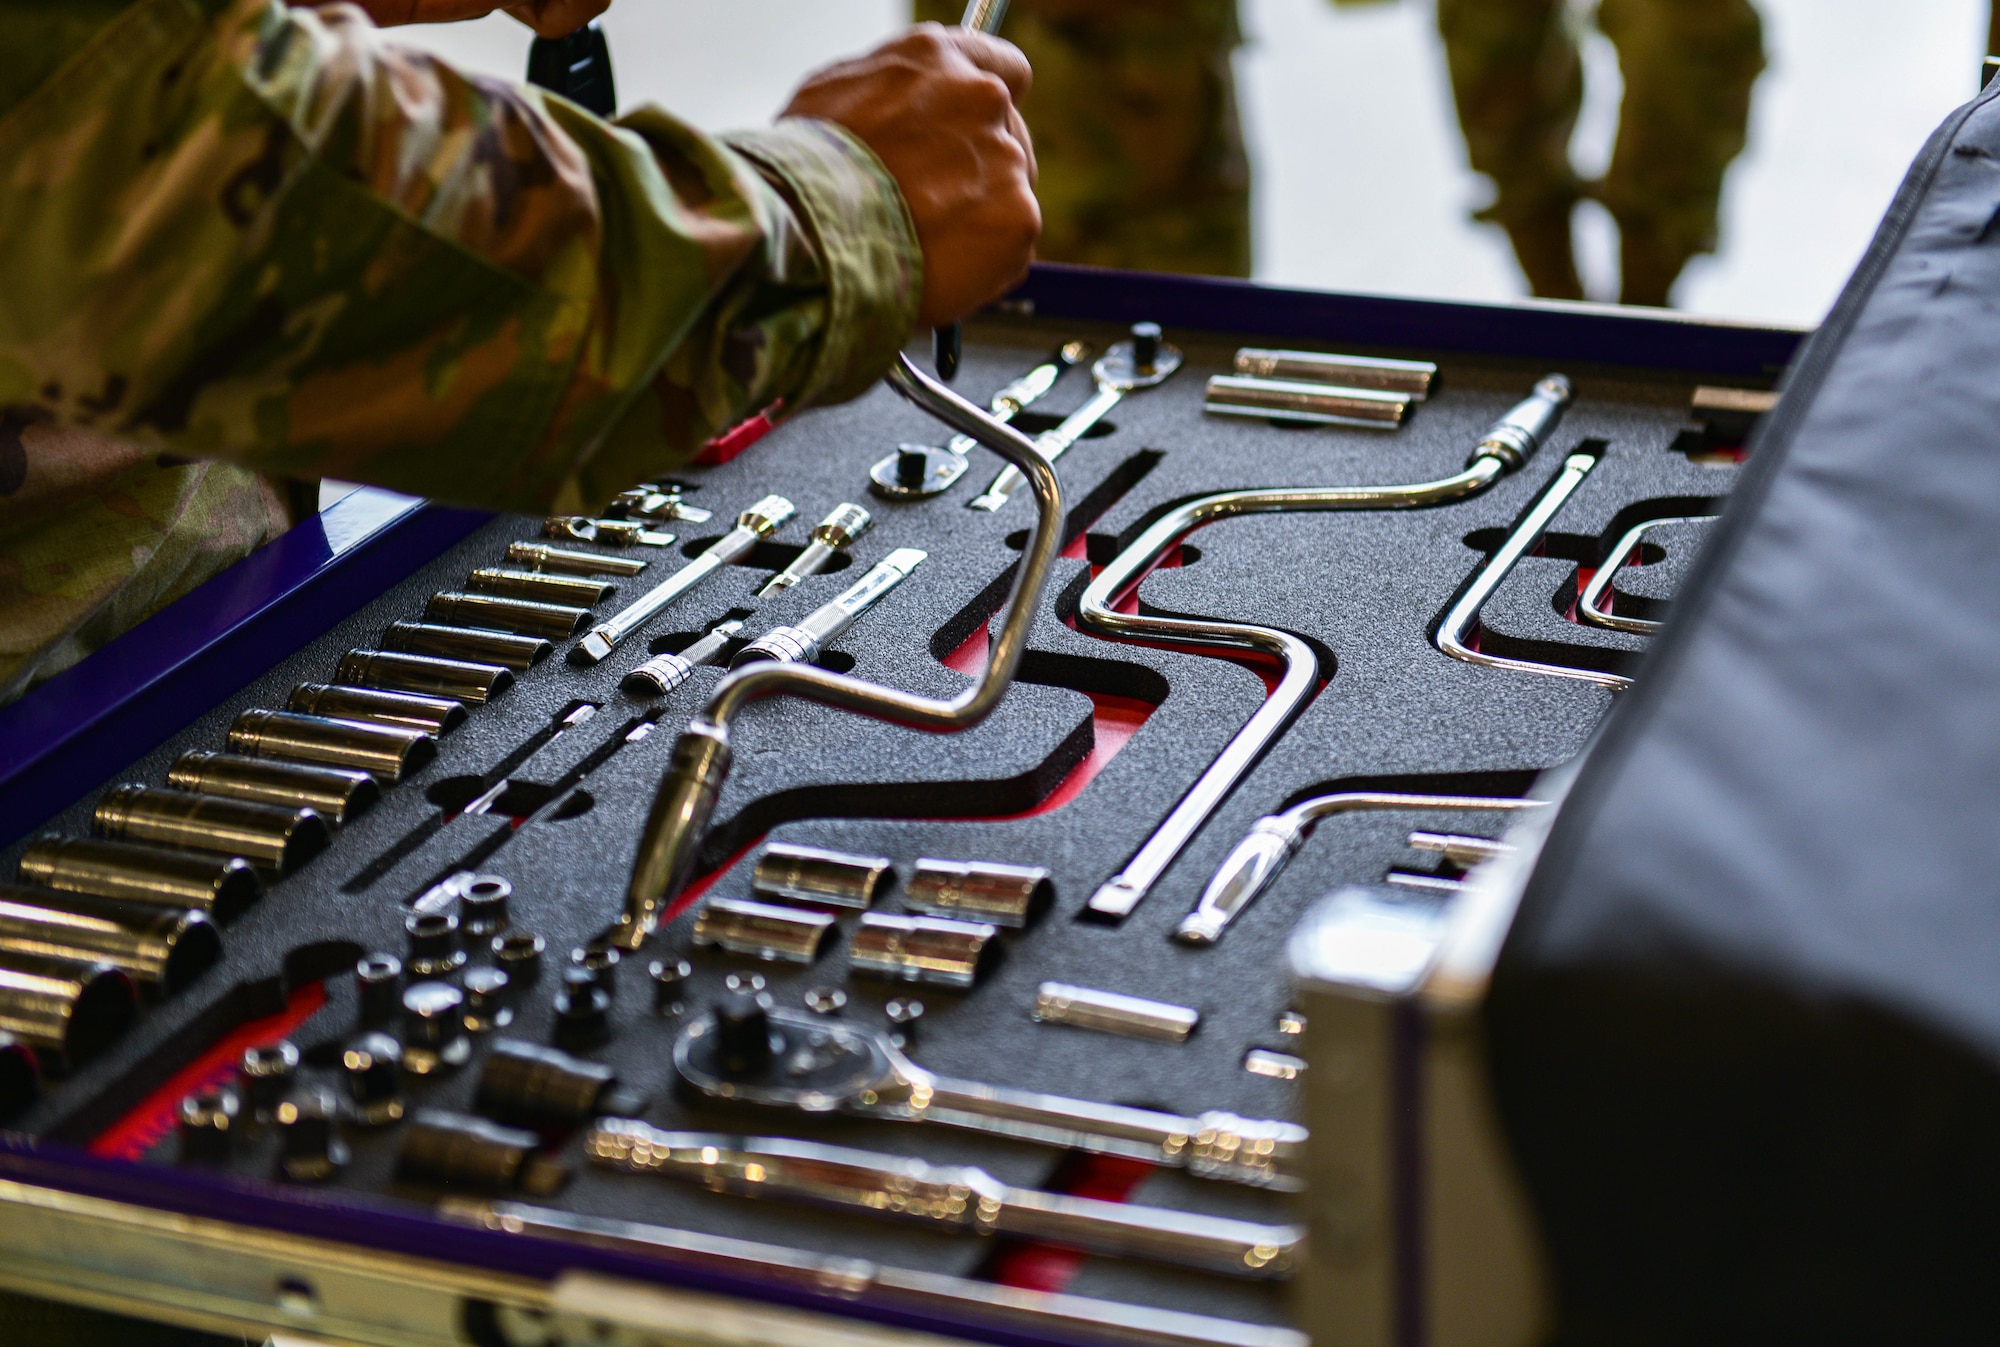 A U.S. Air Force Airman assigned to the 31st Maintenance Squadron picks up a tool during the 3rd quarter Rapid Aircraft Generation and Employment (RAGE) event at Aviano Air Base, Italy, Oct 7, 2021. RAGE held two competitions in which each team was evaluated on technical proficiency, safety procedures and overall time. (U.S. Air Force photo by Senior Airman Brooke Moeder)